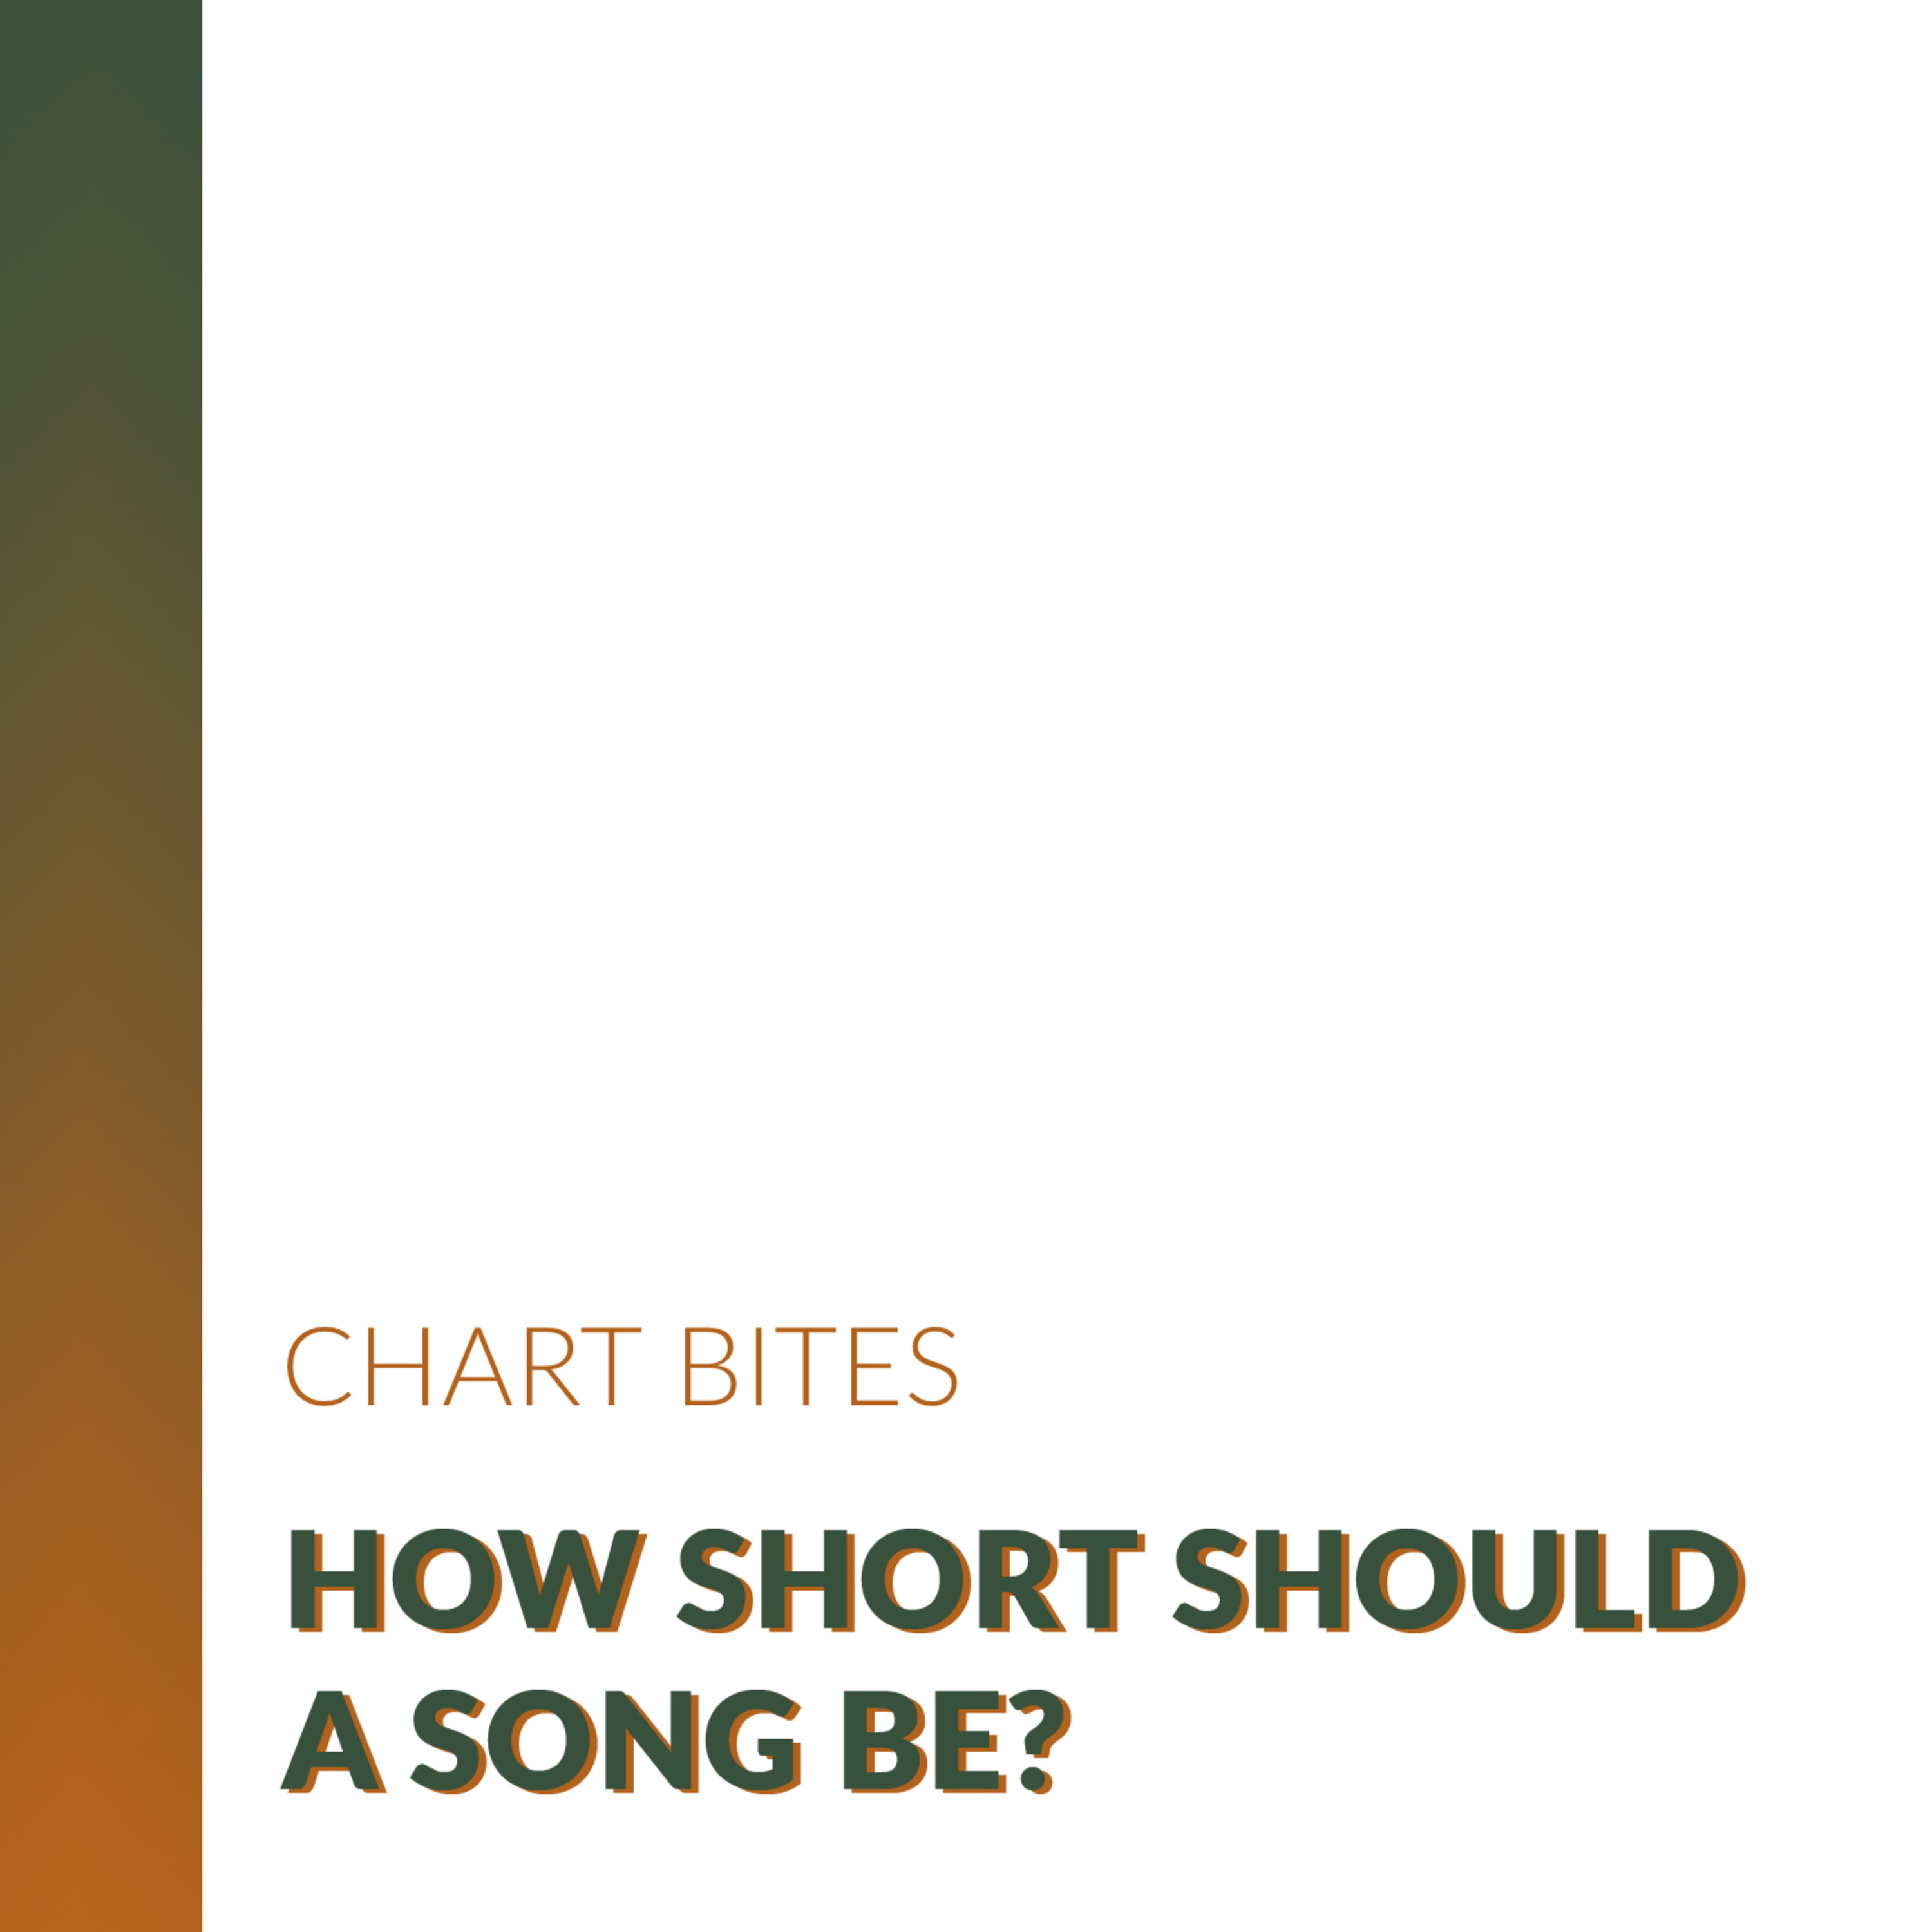 How short should a song be?